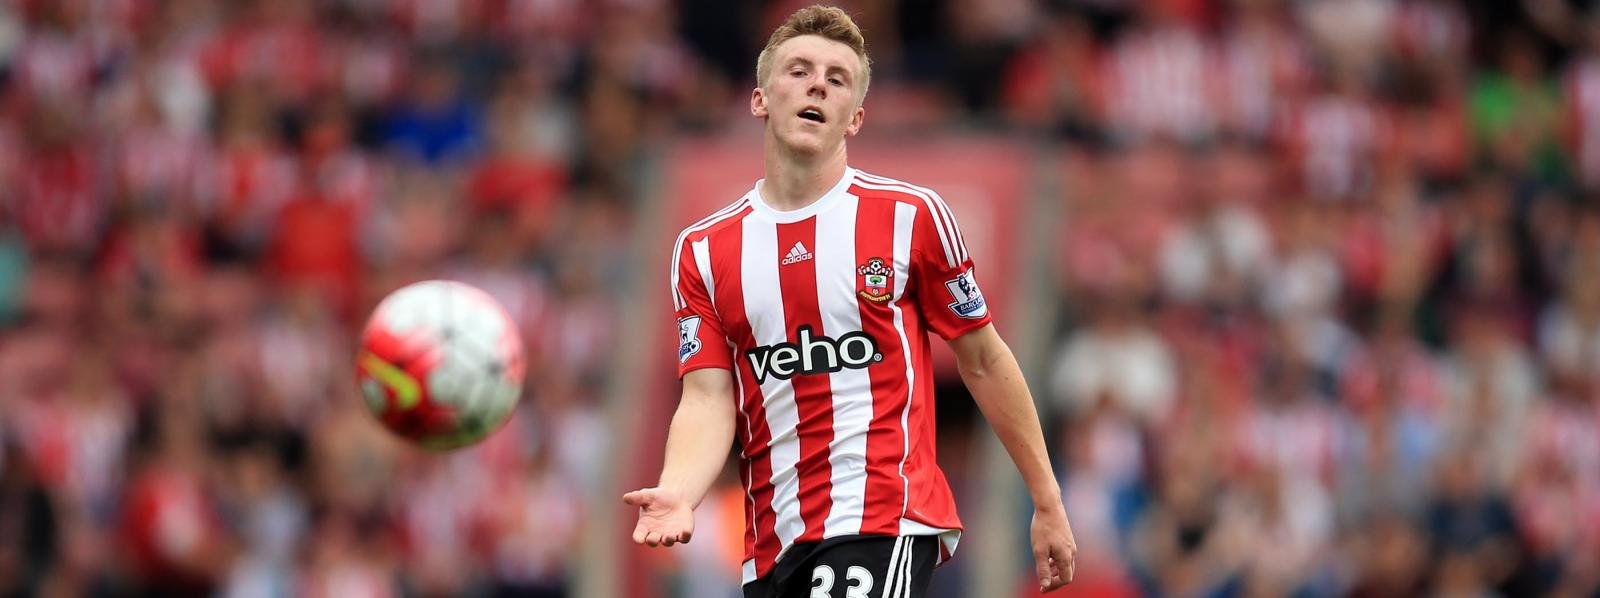 He’s not a Bale or a Shaw, but a confident Targett is proving his worth